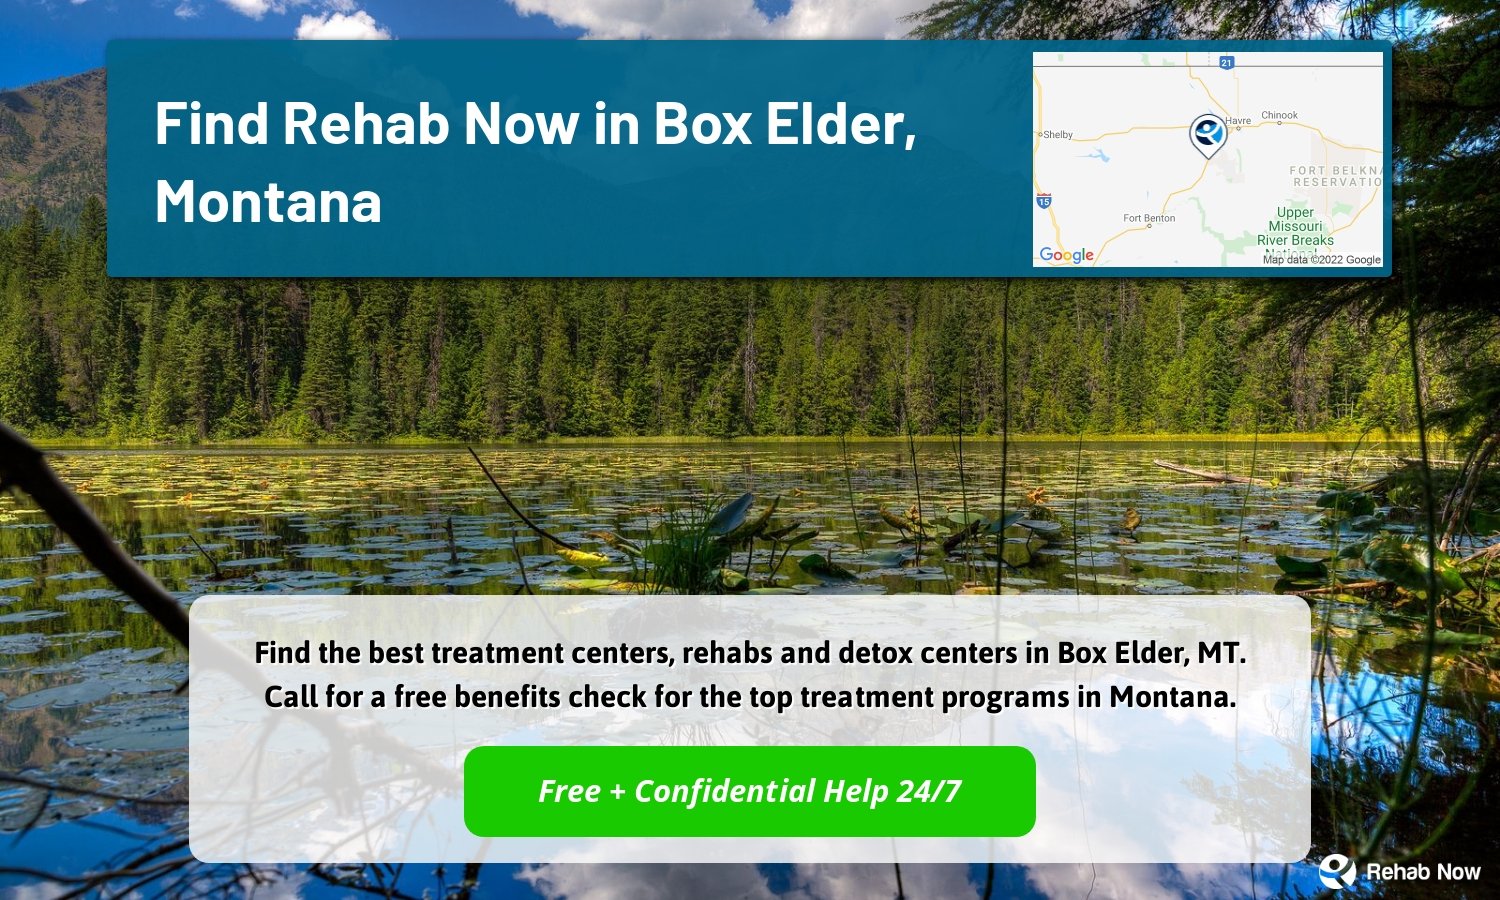 Find the best treatment centers, rehabs and detox centers in Box Elder, MT. Call for a free benefits check for the top treatment programs in Montana.